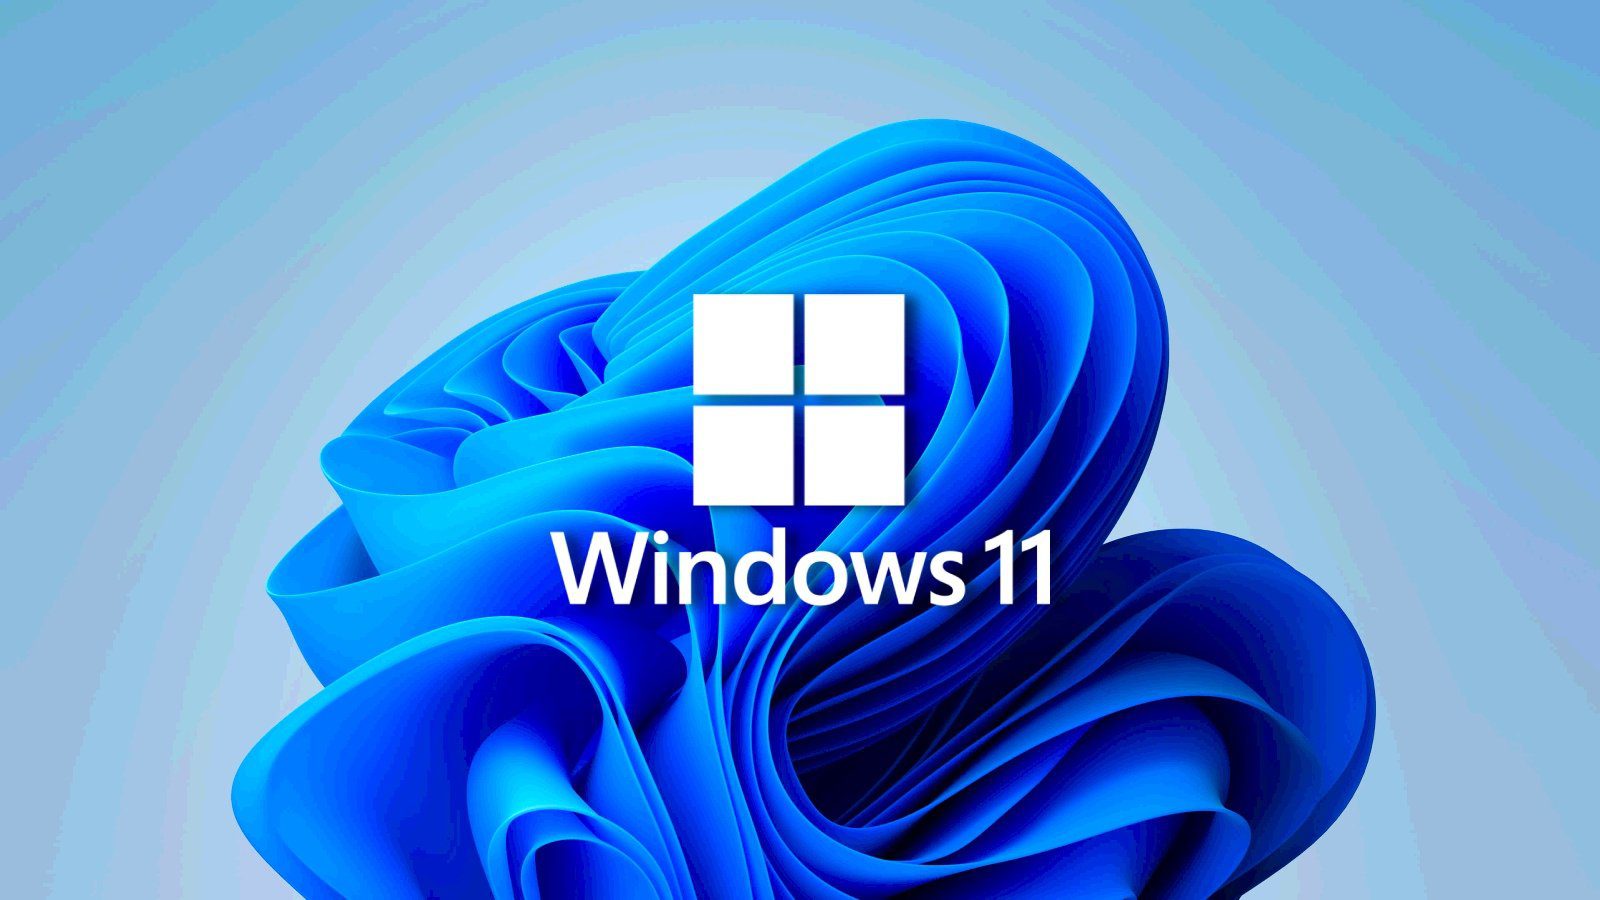 Microsoft announces Windows 11 ‘Moment 3’ update, here are the new features – Source: www.bleepingcomputer.com